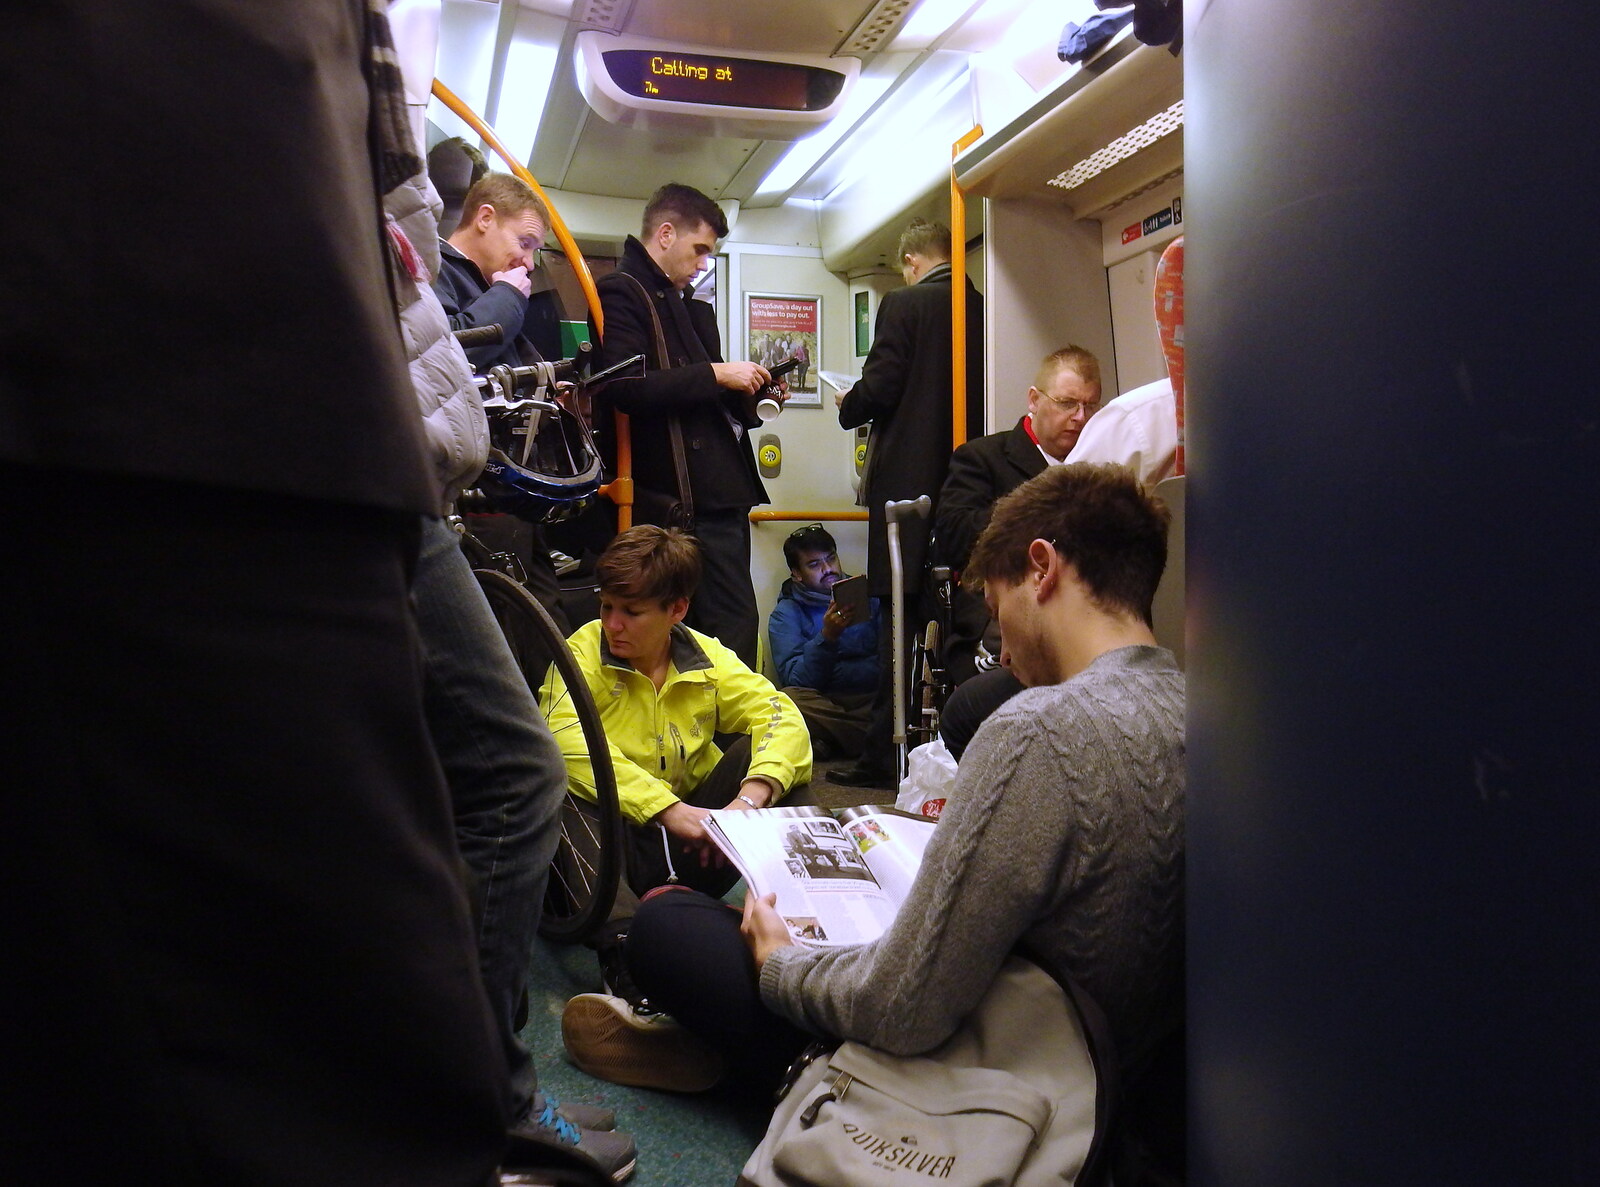 SwiftKey's Arcade Cabinet, and the Streets of Southwark, London - 5th December 2013: The packed train to Norwich